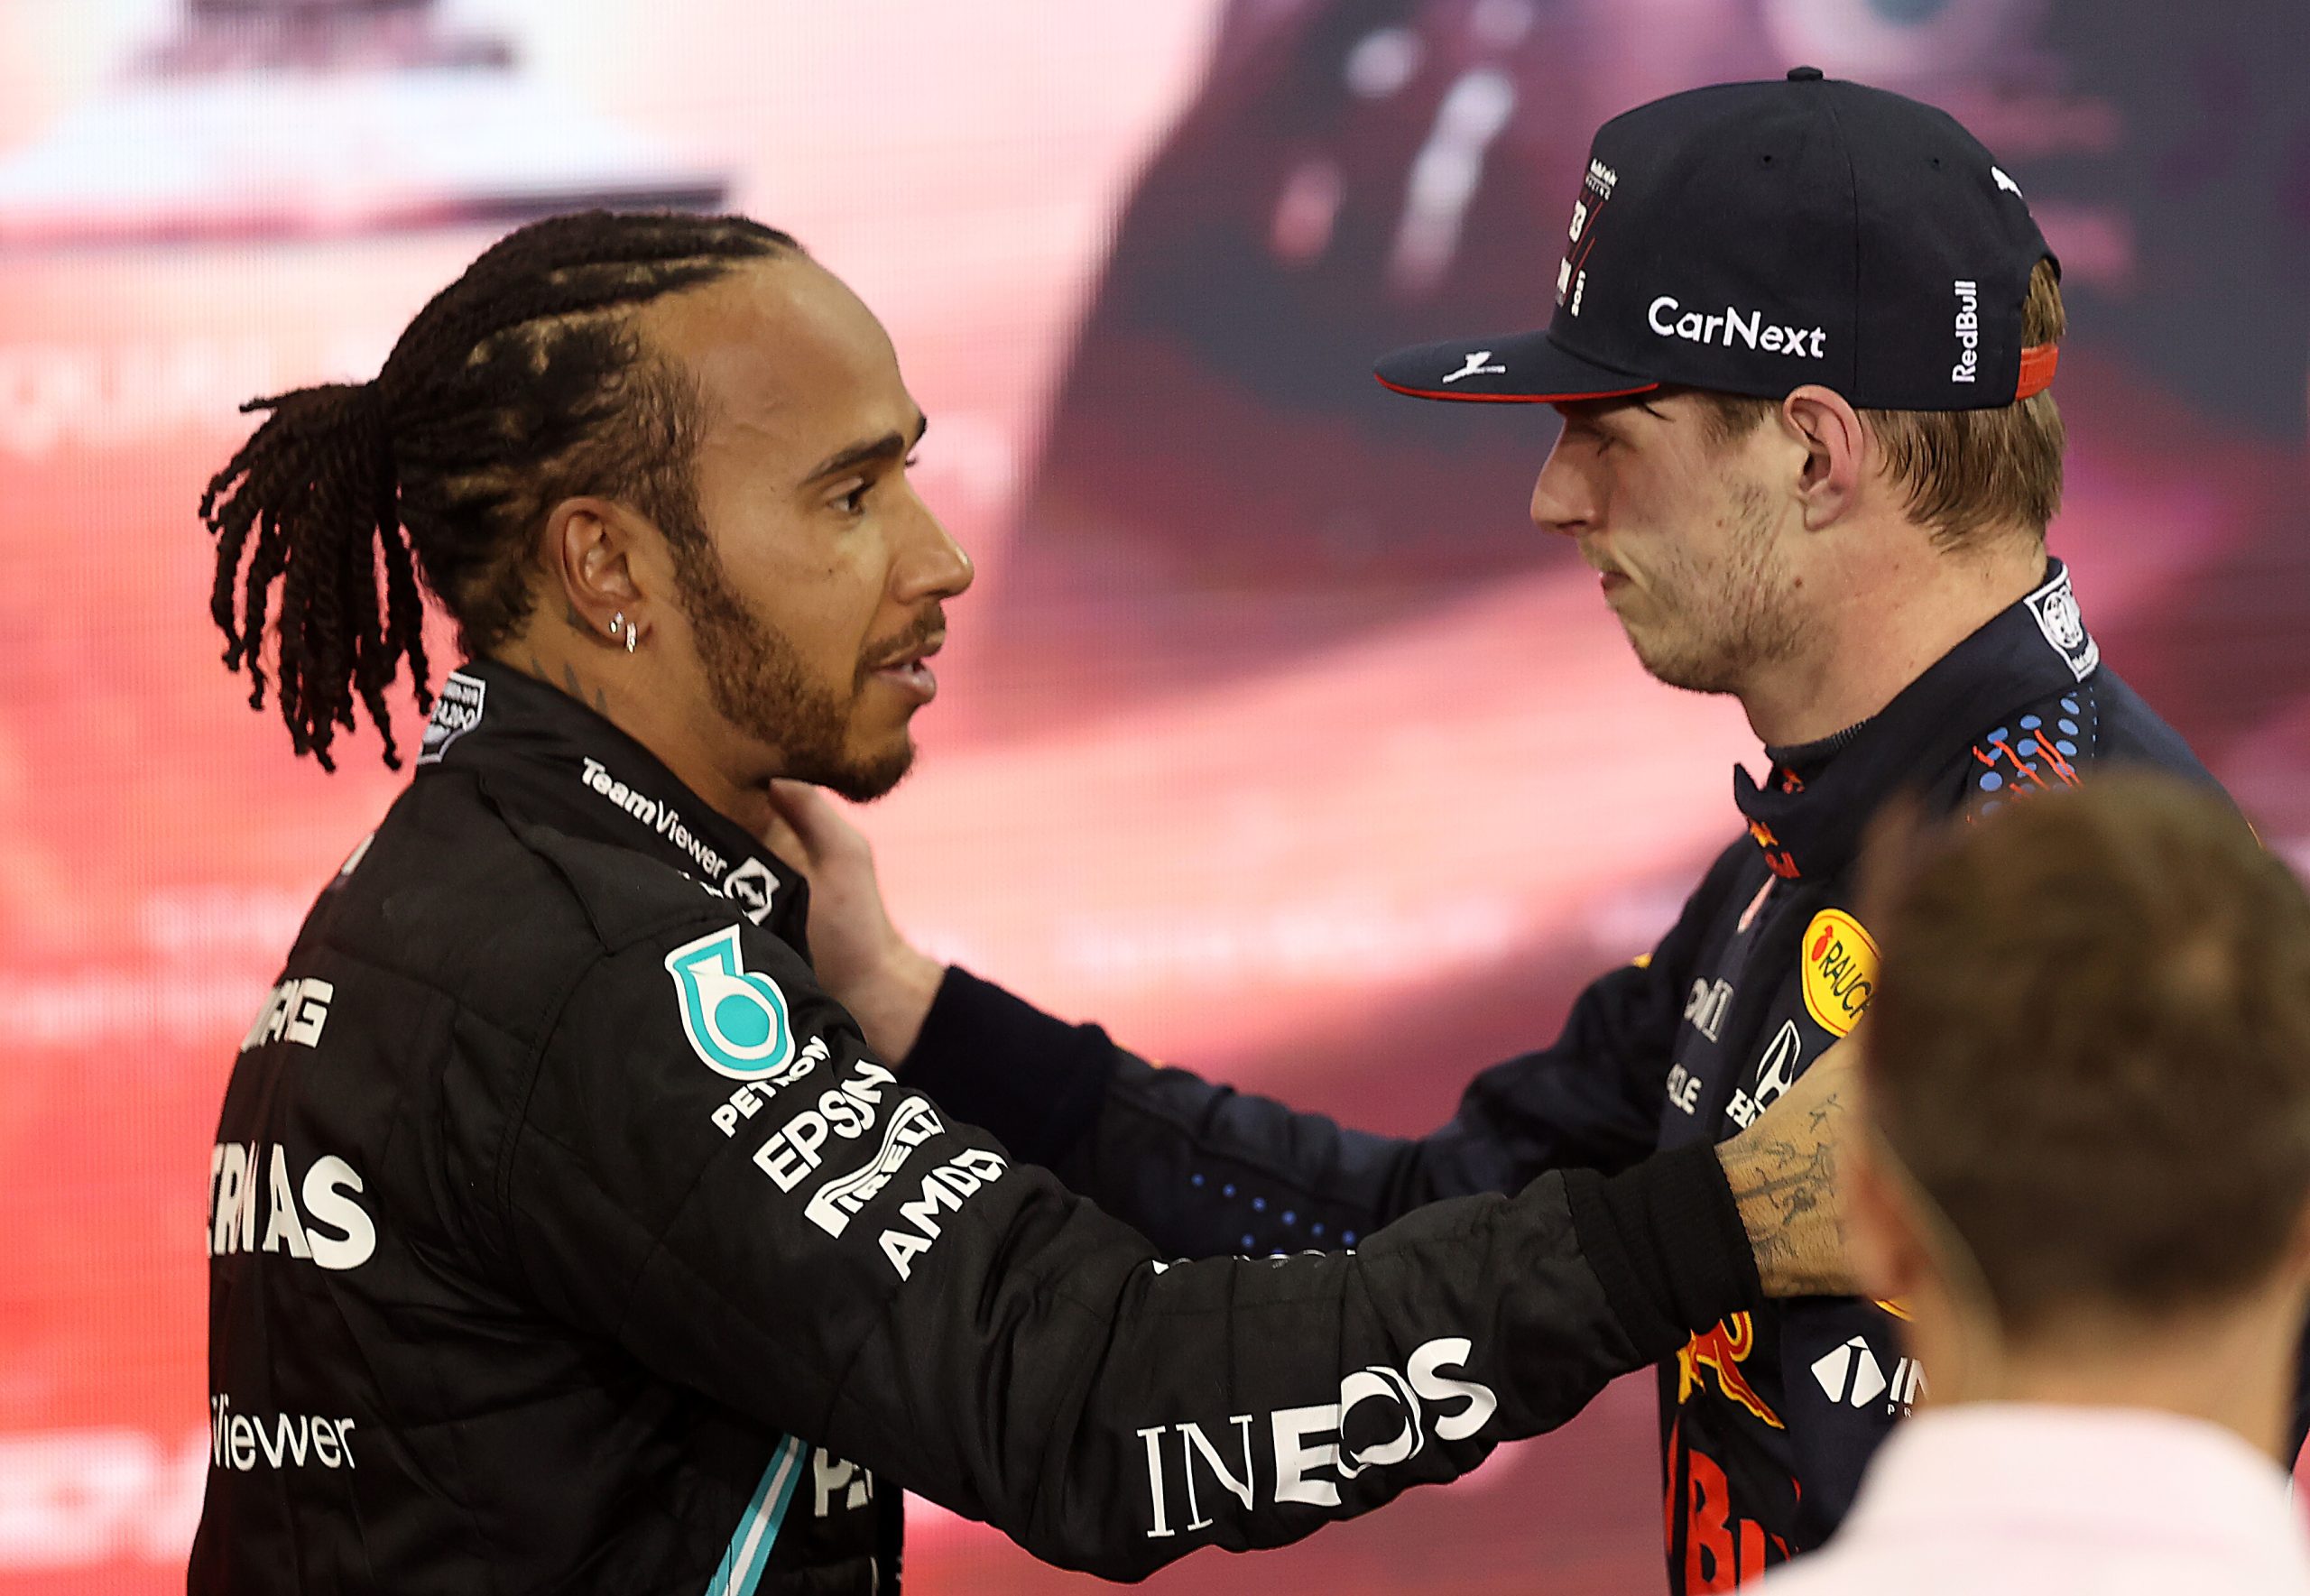 ABU DHABI, UNITED ARAB EMIRATES - DECEMBER 12: Race winner and 2021 F1 World Drivers Champion Max Verstappen of Netherlands and Red Bull Racing is congratulated by runner up in the race and championship Lewis Hamilton of Great Britain and Mercedes GP during the F1 Grand Prix of Abu Dhabi at Yas Marina Circuit on December 12, 2021 in Abu Dhabi, United Arab Emirates. (Photo by Lars Baron/Getty Images) *** BESTPIX *** // Getty Images / Red Bull Content Pool // SI202112120675 // Usage for editorial use only //